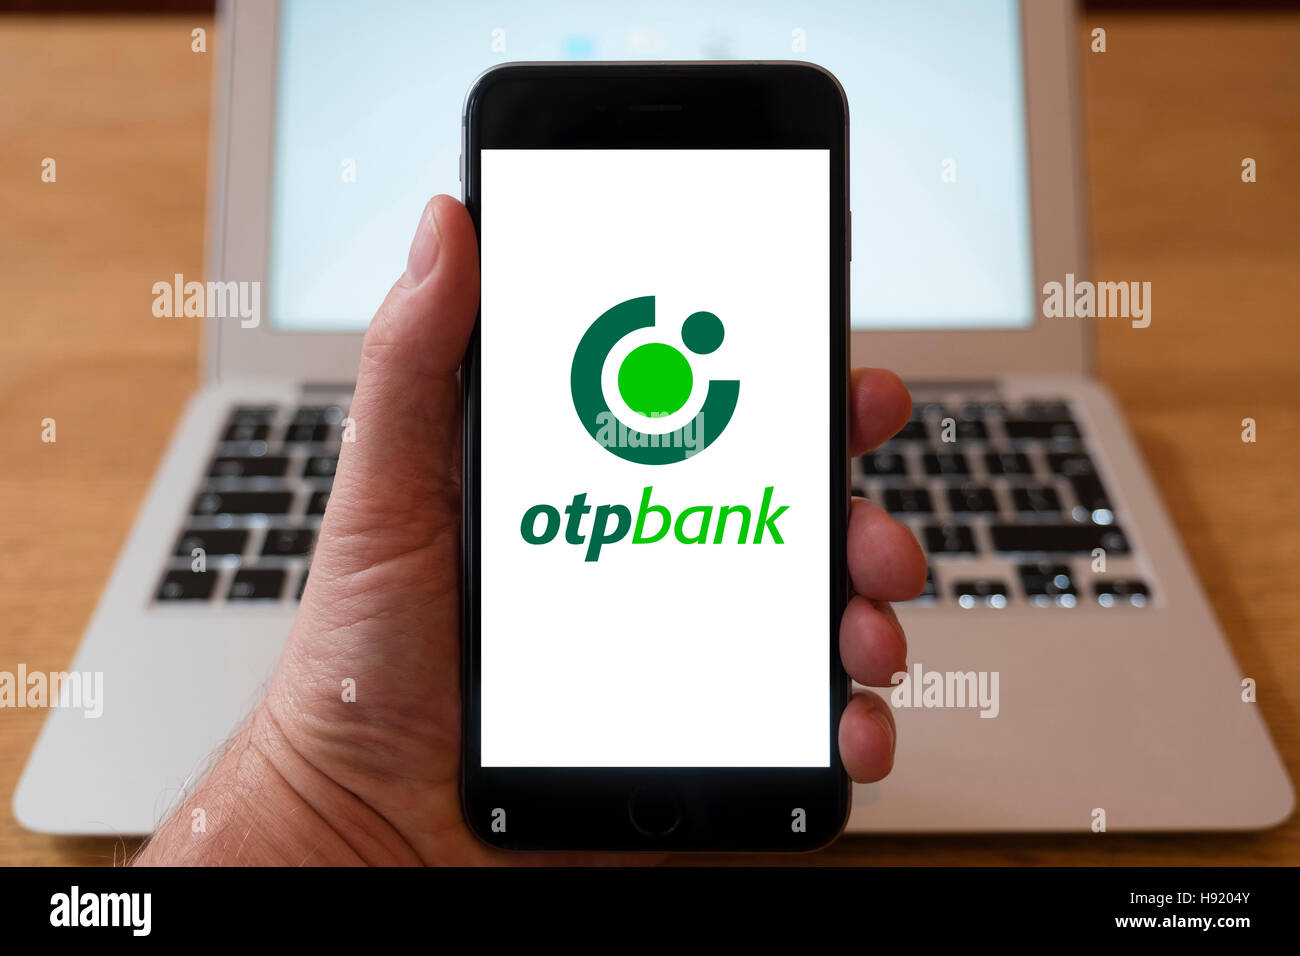 Using iPhone smart phone to display website logo of OTP bank a large independent financial services provider in Central ,  Eastern Europe Stock Photo